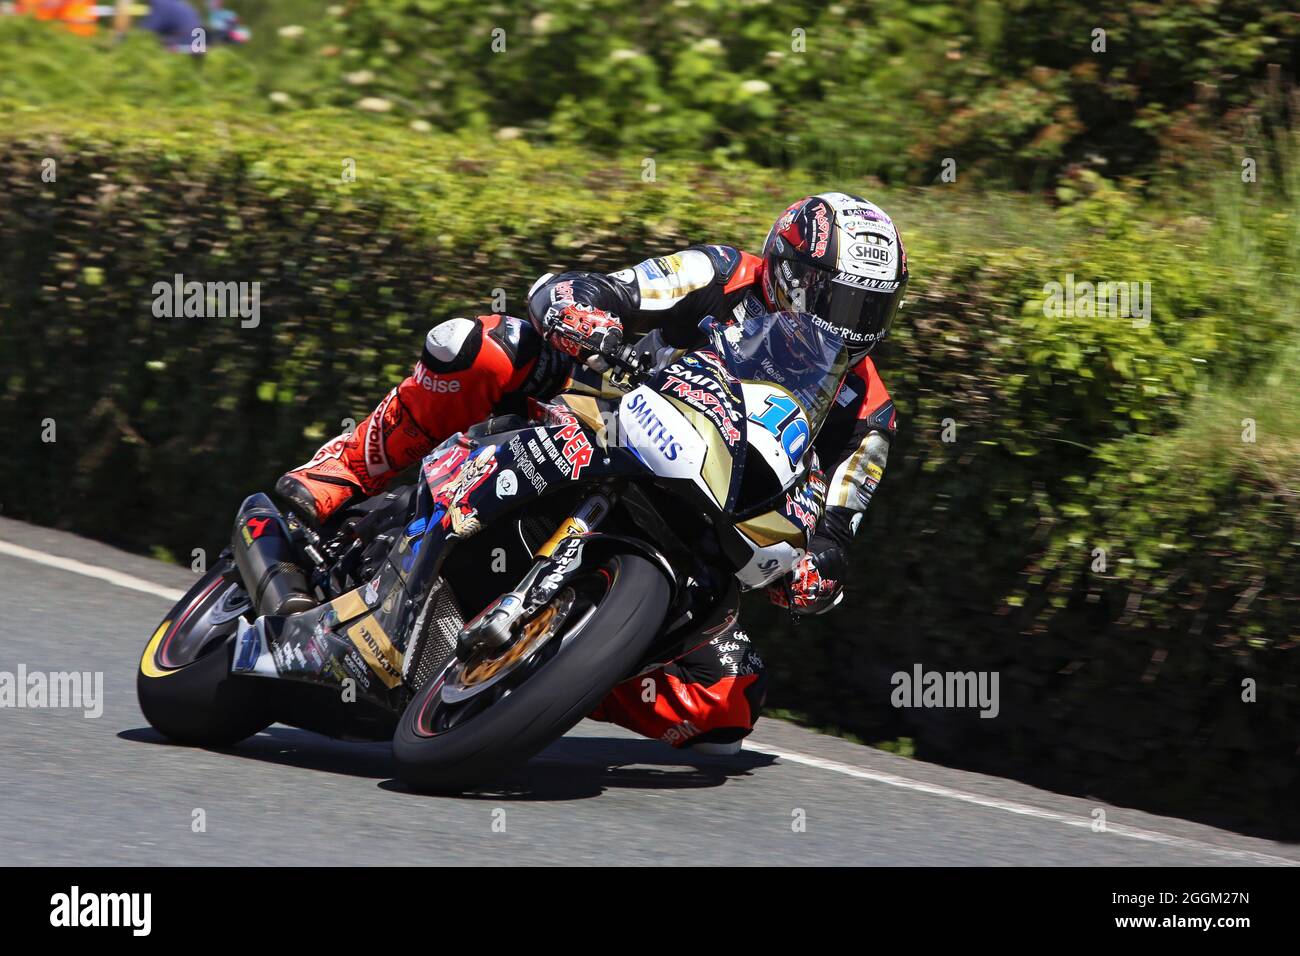 Peter Hickman approaching the Gooseneck corner during the 2019 Isle of Man Supersport TT race in the Isle of Man on the 675cc Triumph Stock Photo